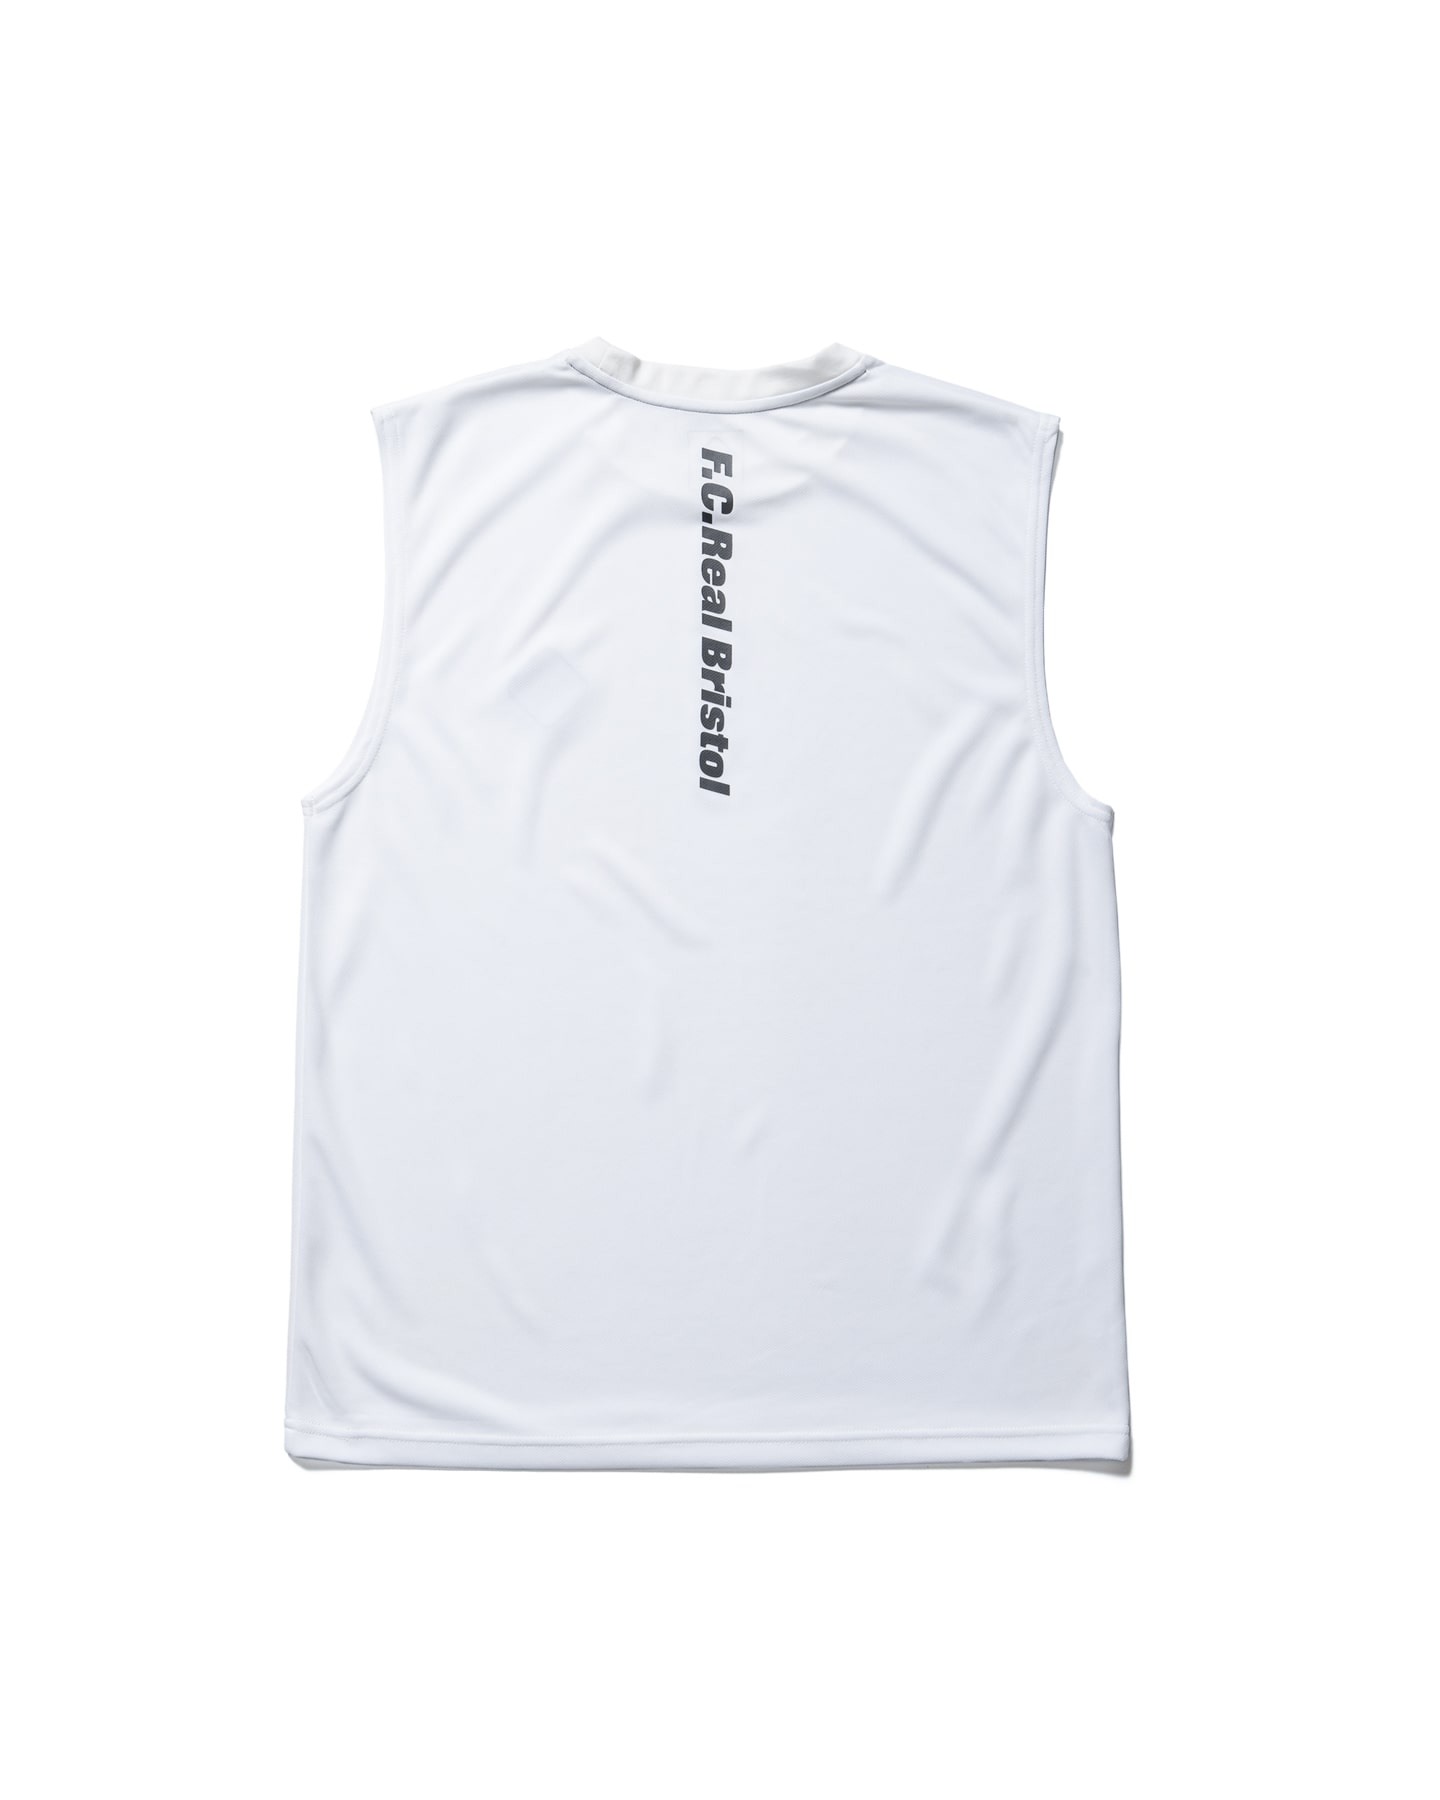 SOPH. | NO SLEEVE TRAINING TOP(S WHITE):